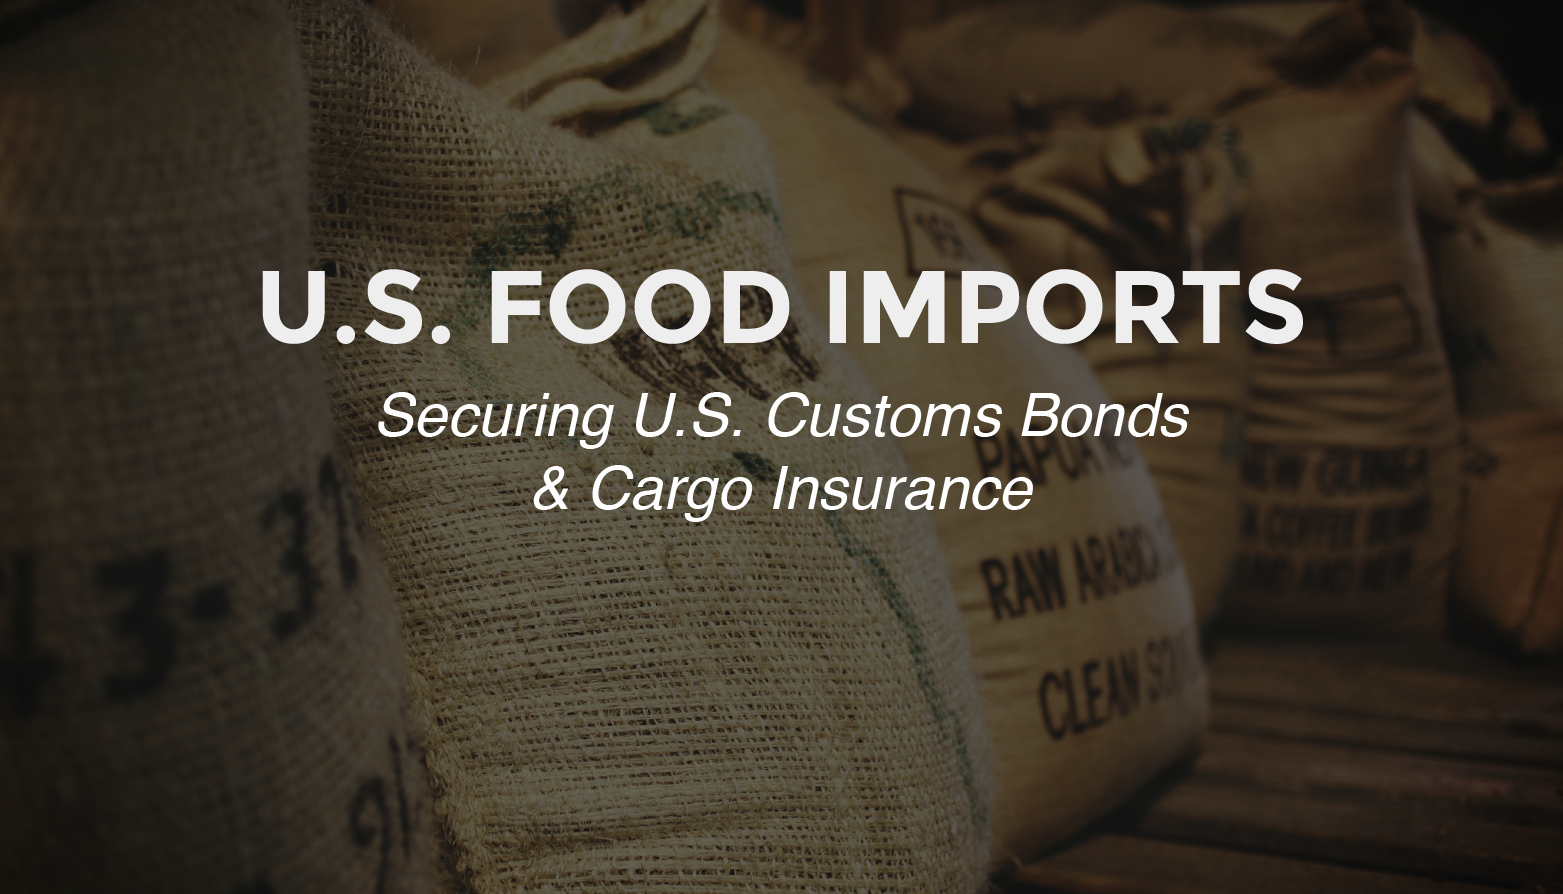 Securing a Customs Bond and Cargo Insurance for U.S. Food Imports.